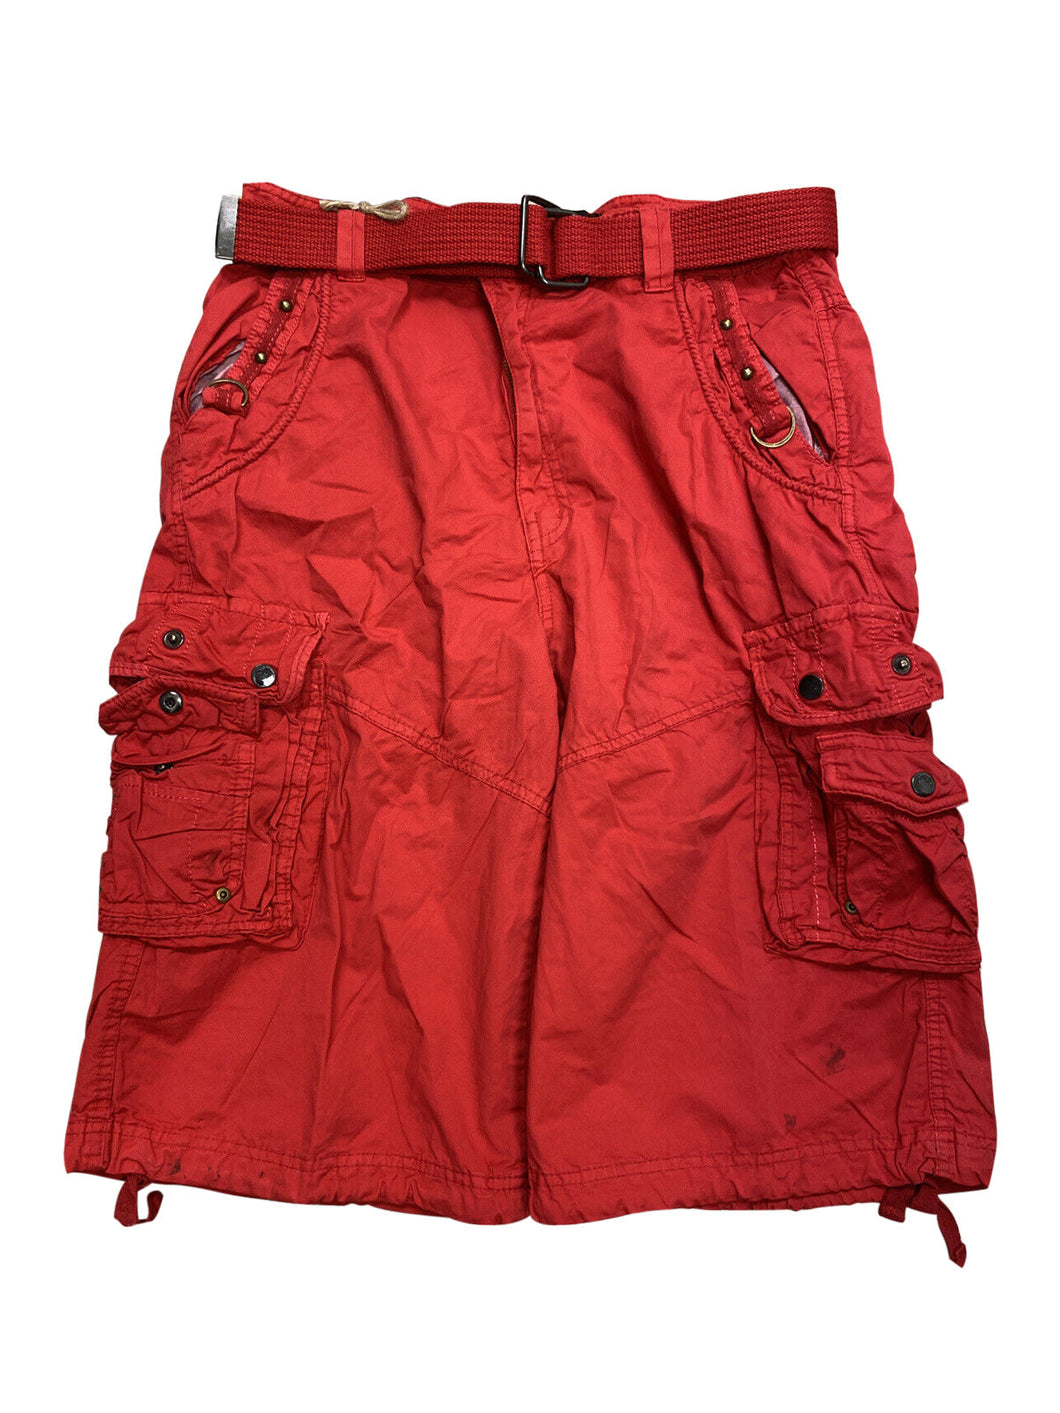 Mens Red Cargo Shorts with Adjustable Belt